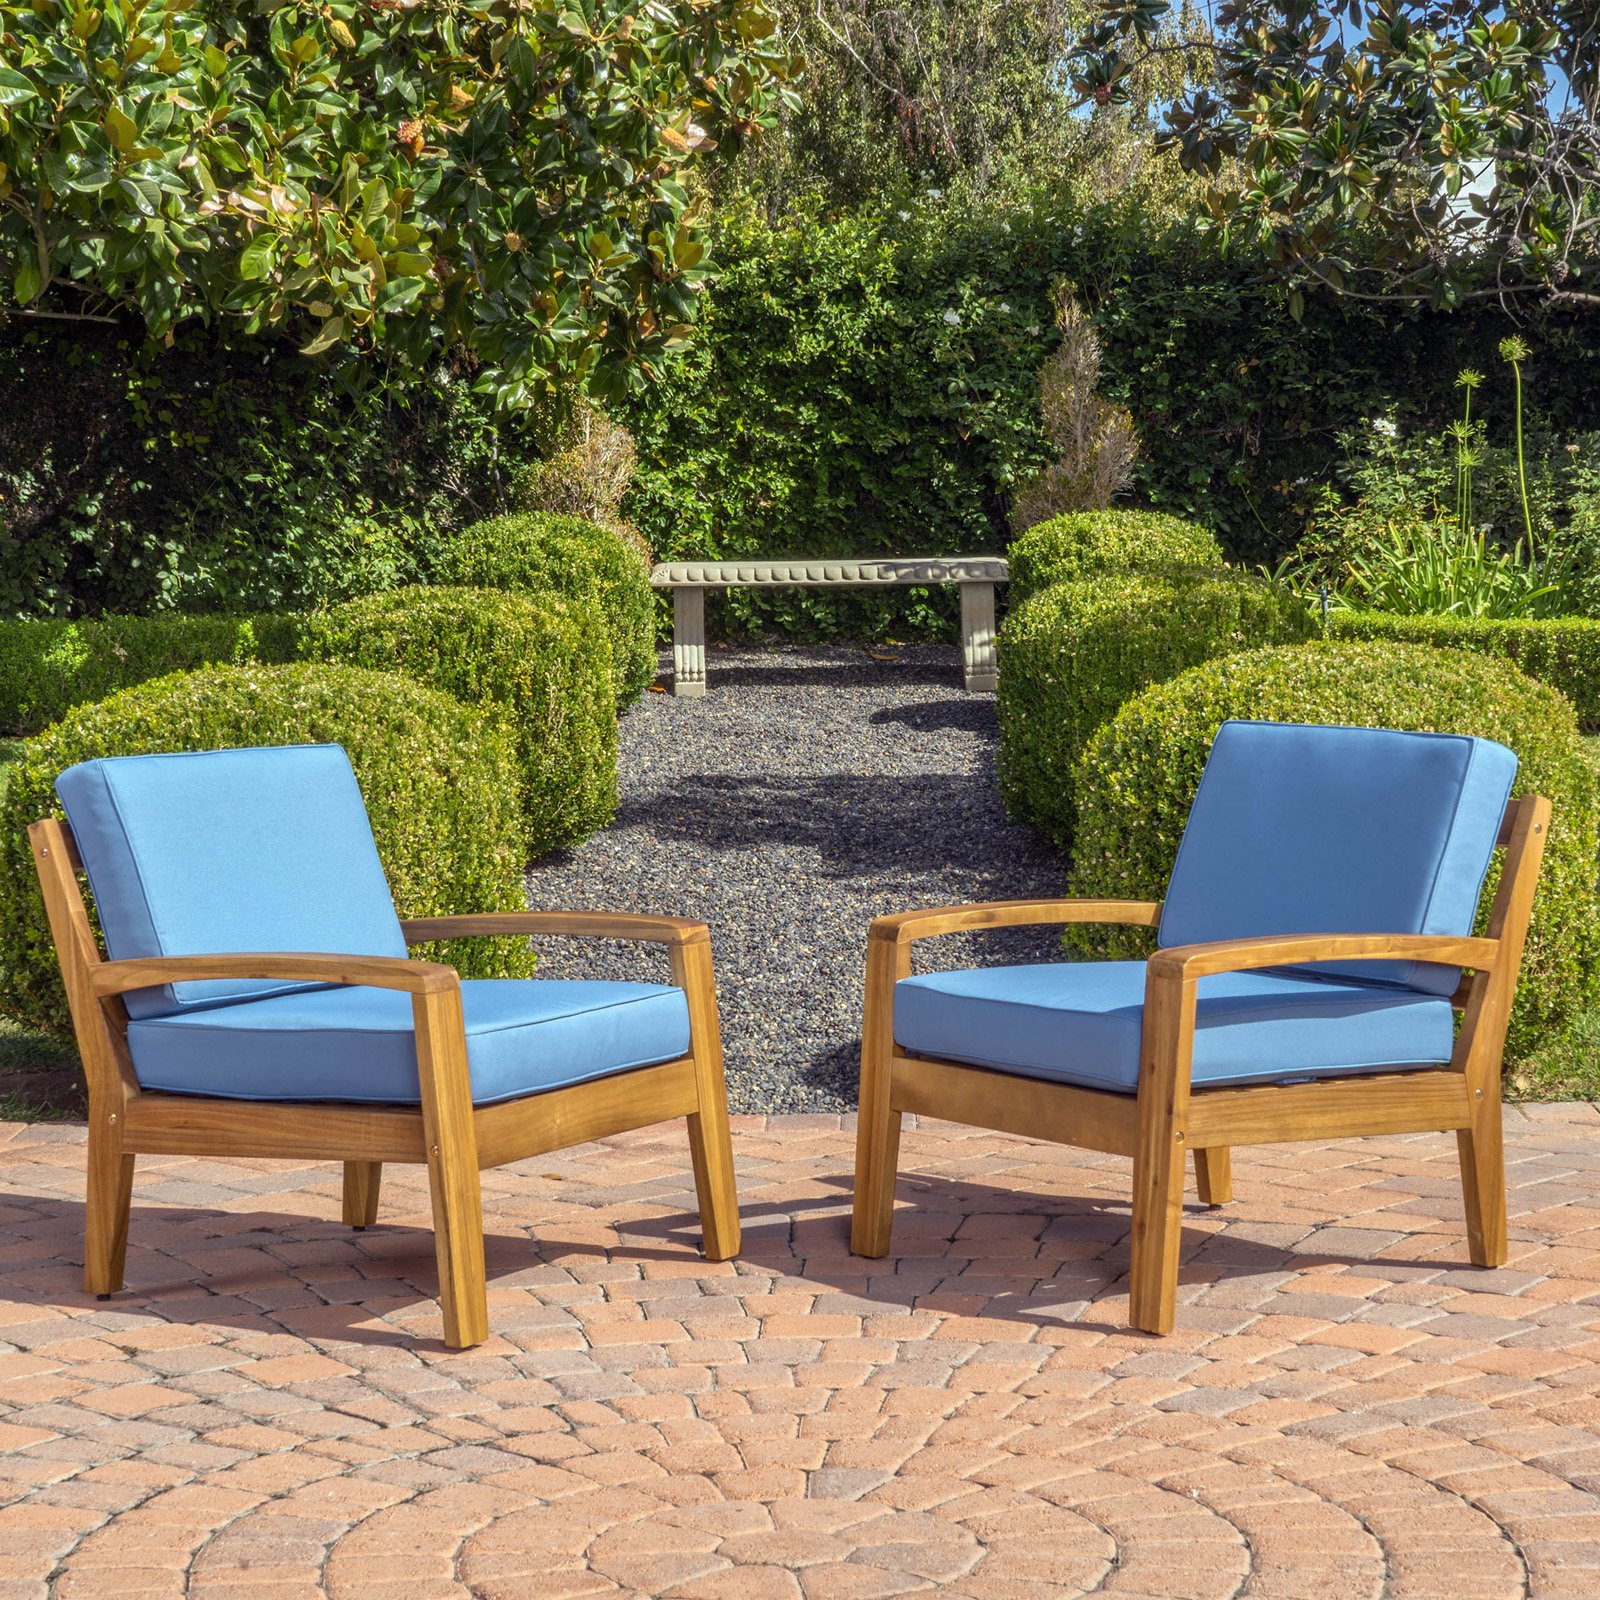 Gorlomi Wooden Patio Club Chairs with Cushions - image 3 of 6